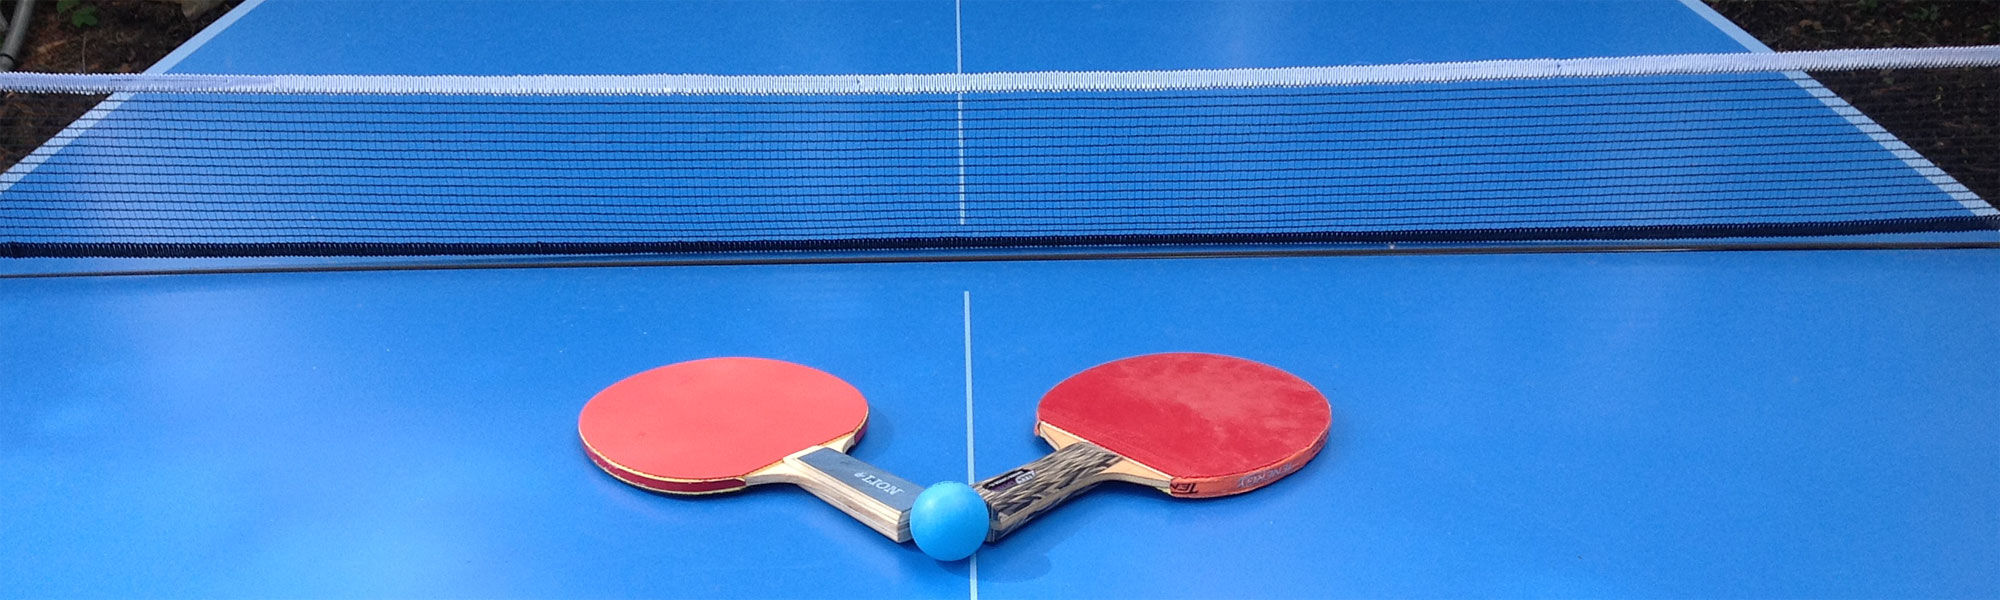 Table Tennis Tables from Lyric Ireland